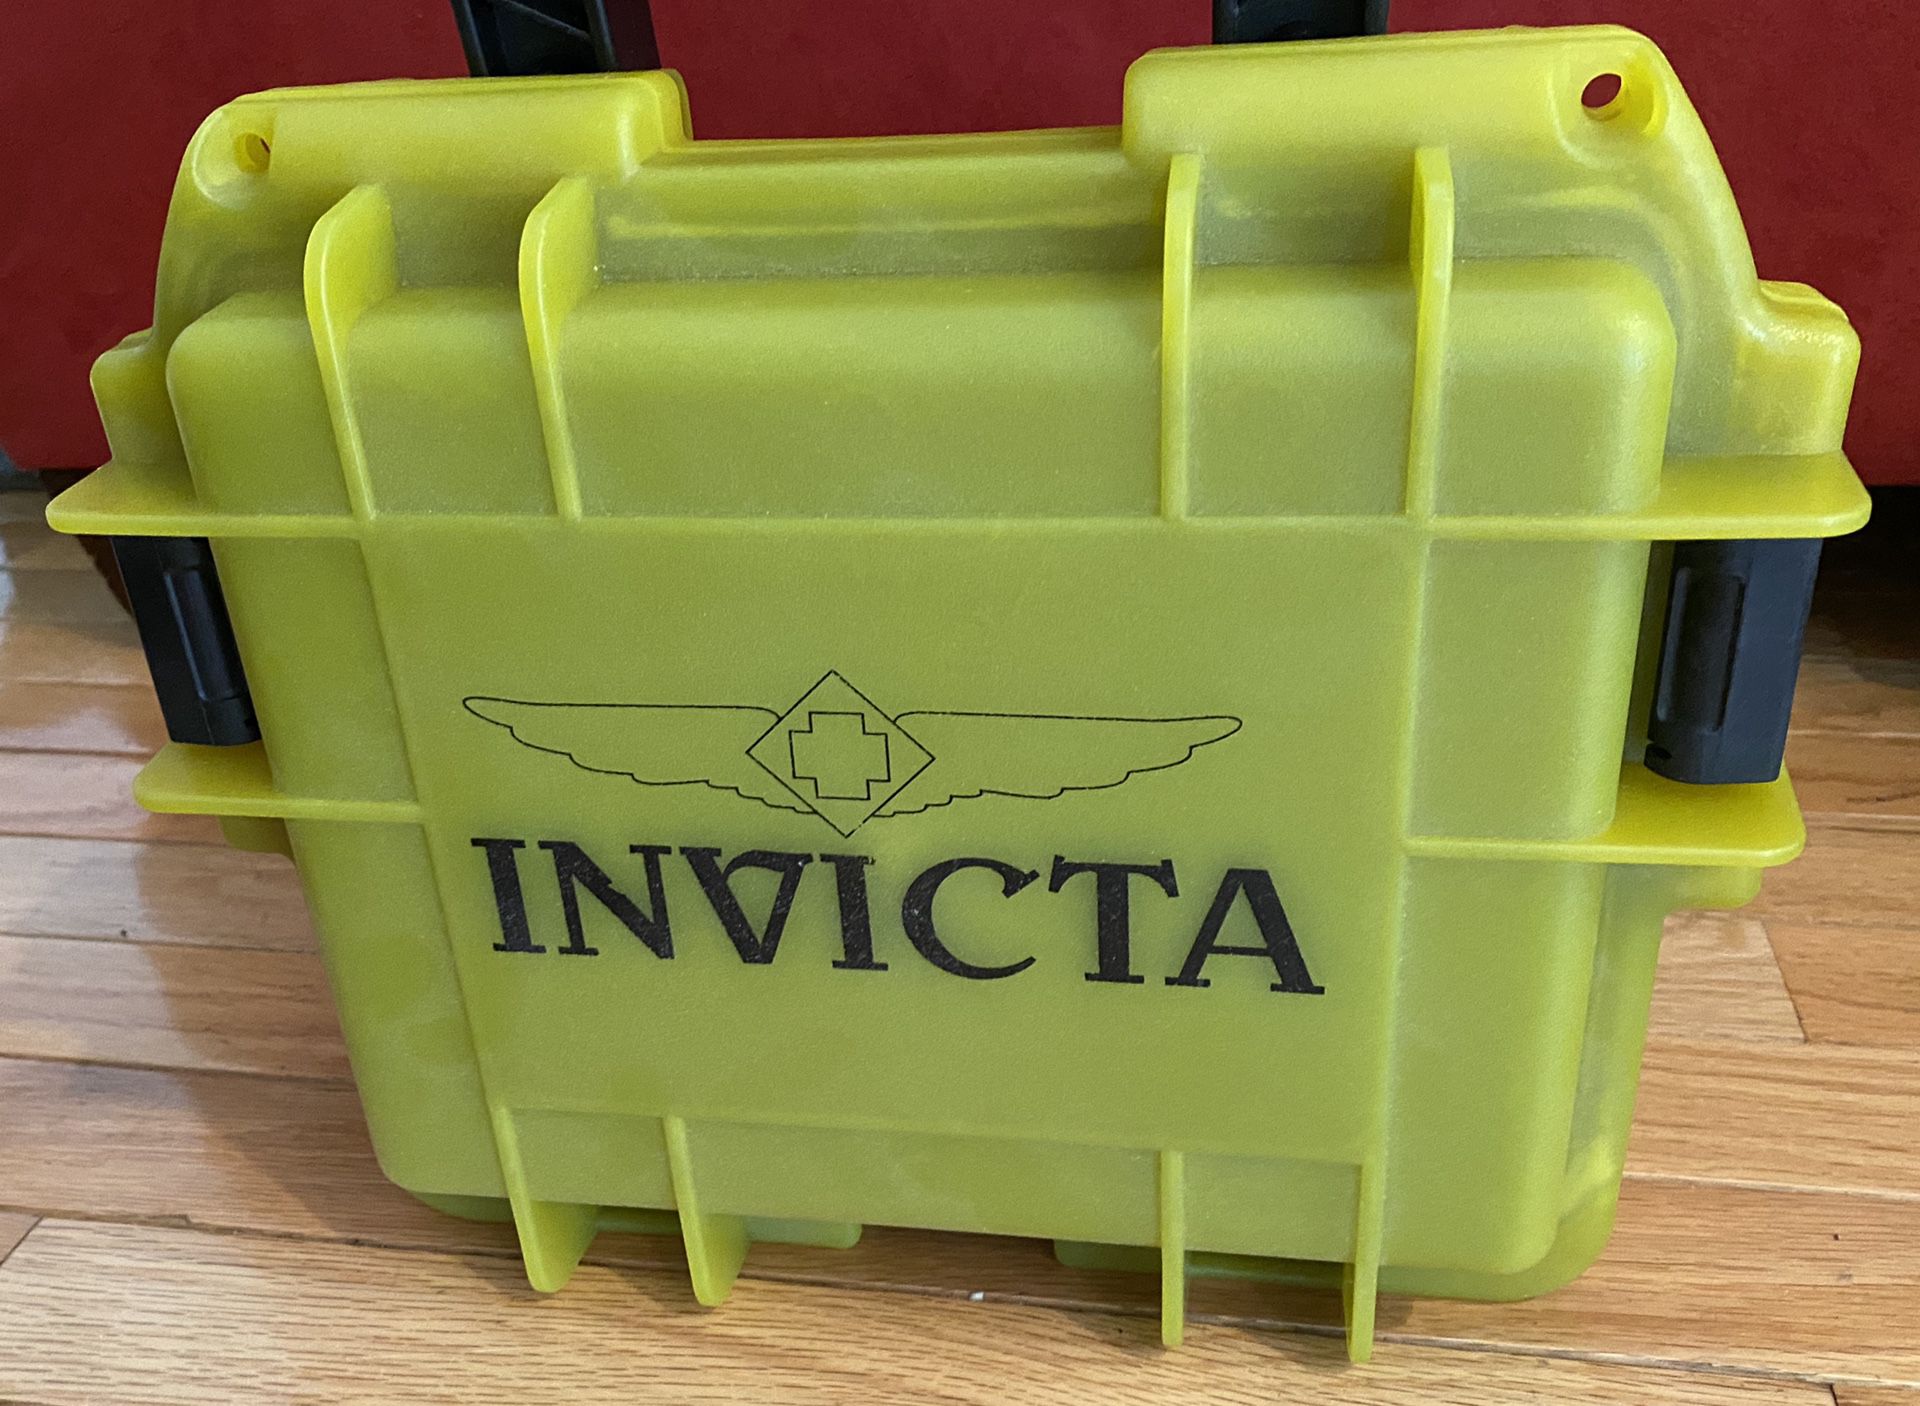 INVICTA - 3 Watch Glow in the Dark Carrying Case